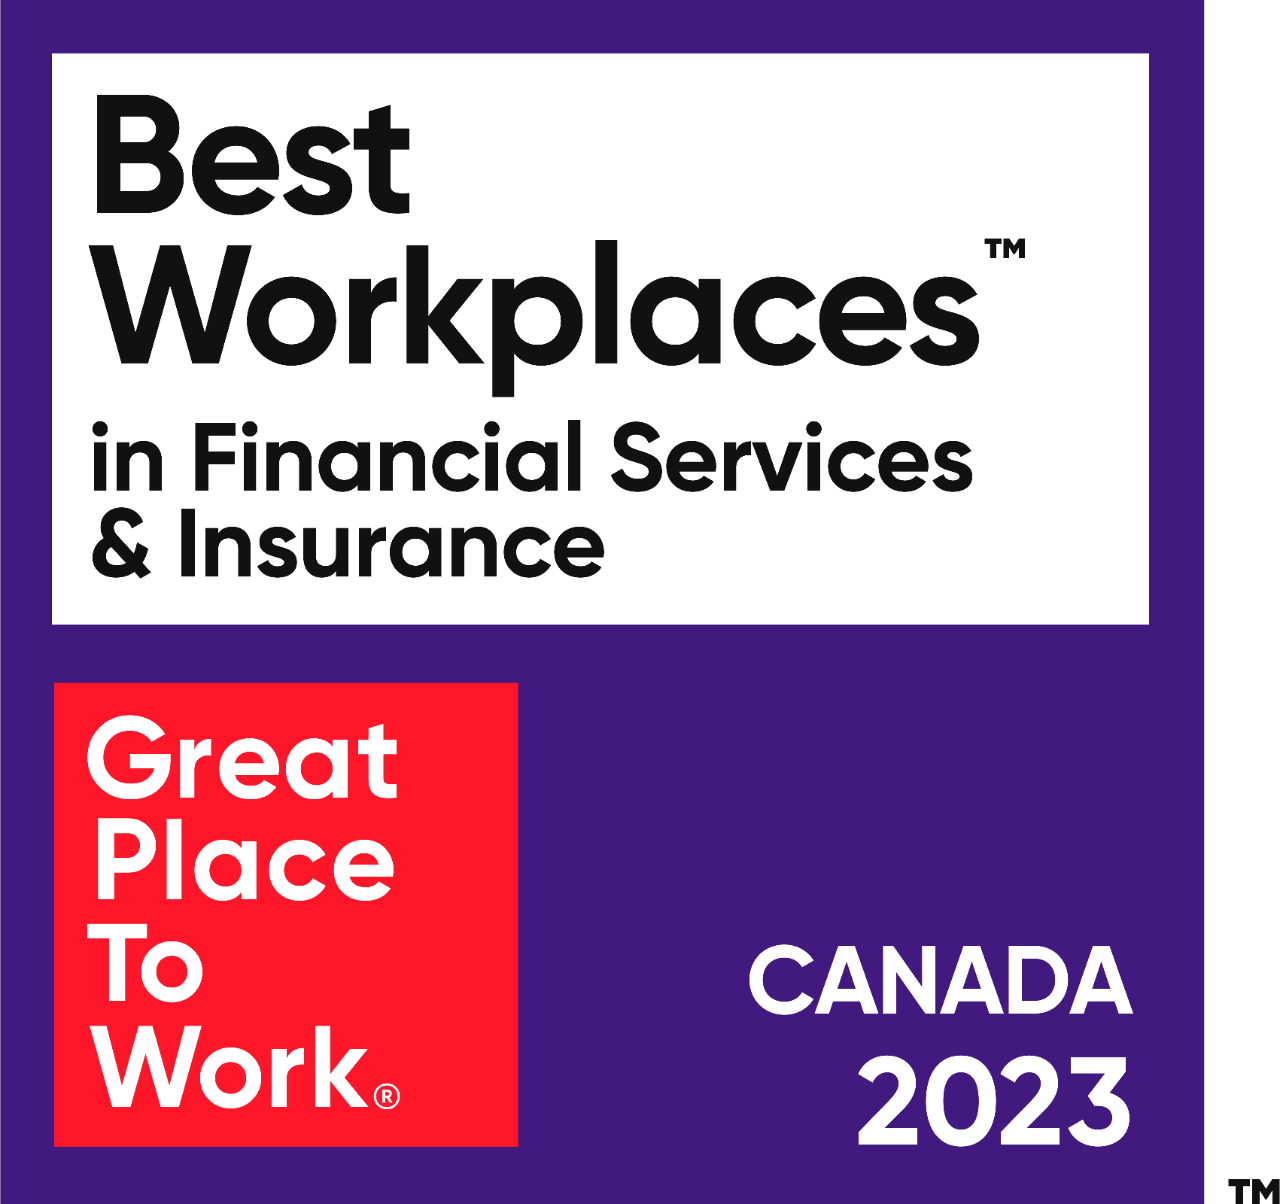 Best Workplaces™ in Financial Services and Insurance in Canada